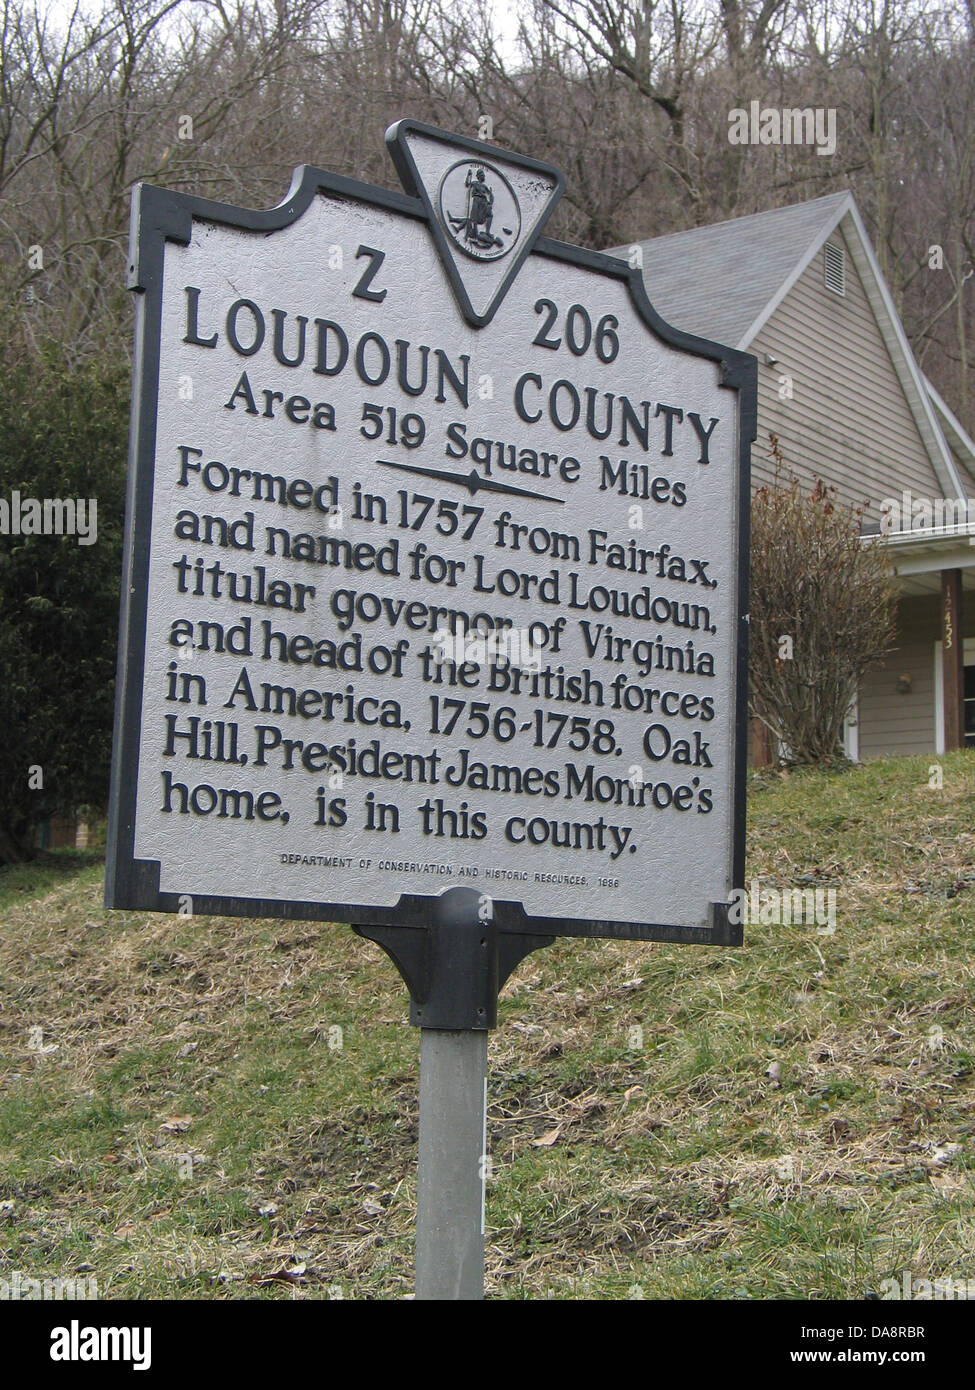 LOUDOUN COUNTY Area 519 Square Miles Formed in 1757 from Fairfax, and named for Lord Loudoun, titular governor of Virginia and head of the British forces in America, 1756-1758. Oak Hill, President James Monroe's home, is in this county. Department of Conservation and Historic Resources, 1986 Stock Photo